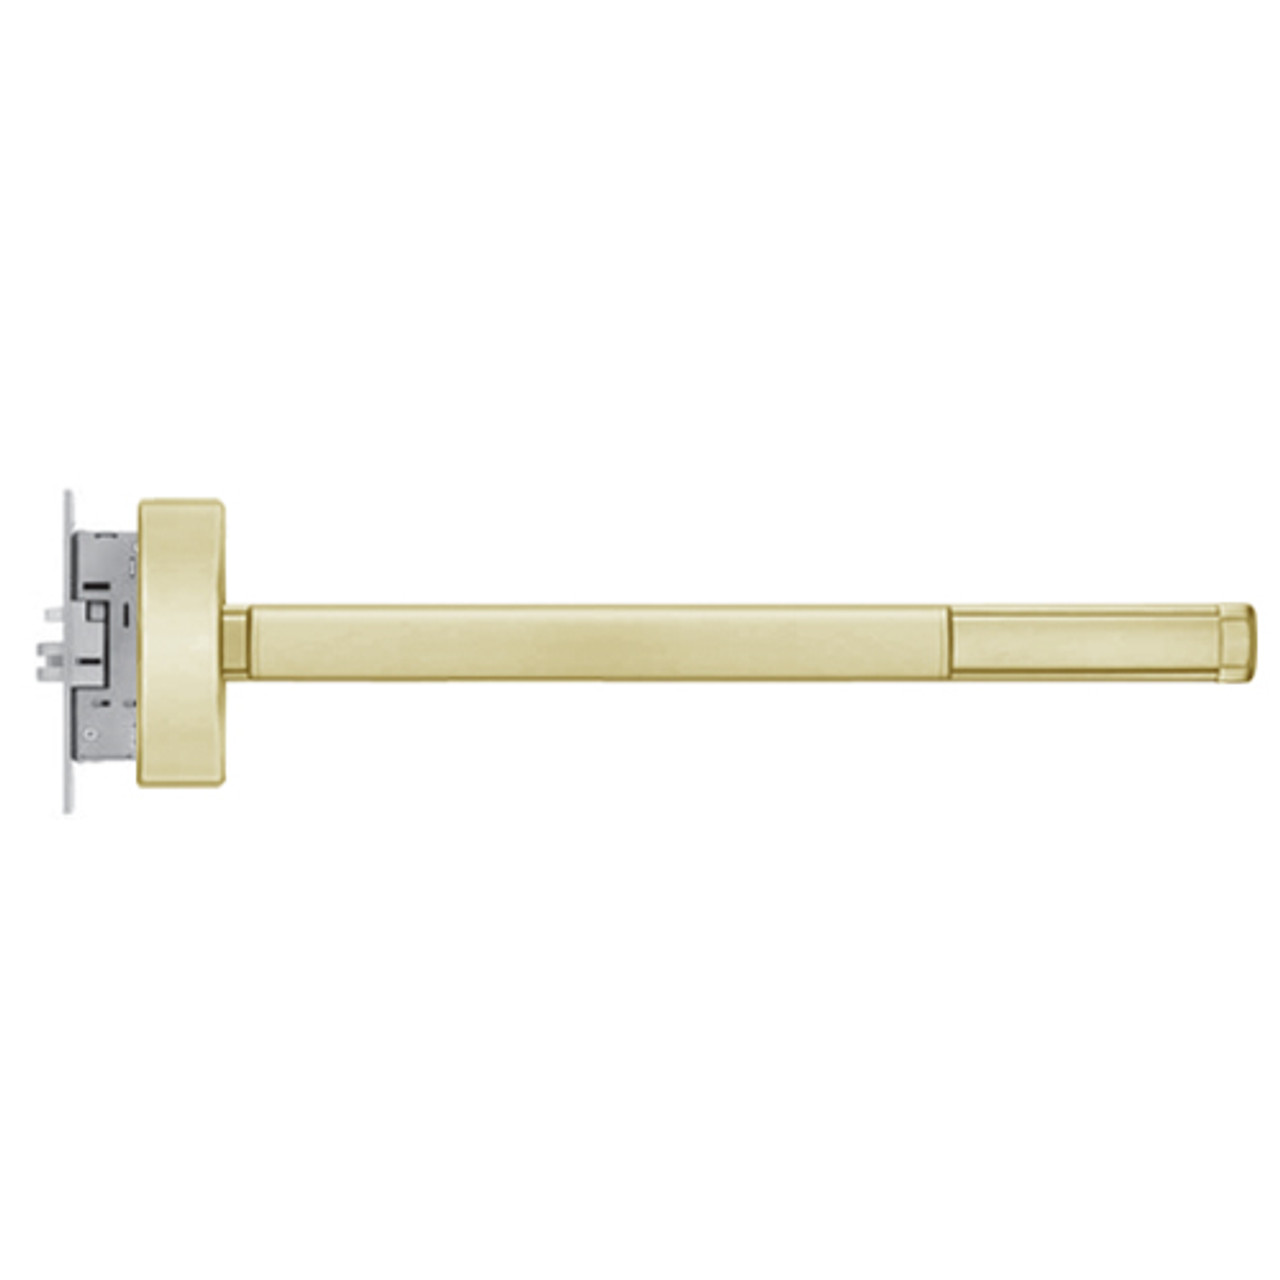 MLRFL2301-LHR-606-36 PHI 2300 Series Fire Rated Apex Mortise Exit Device with Motorized Latch Retraction Prepped for Cover Plate in Satin Brass Finish